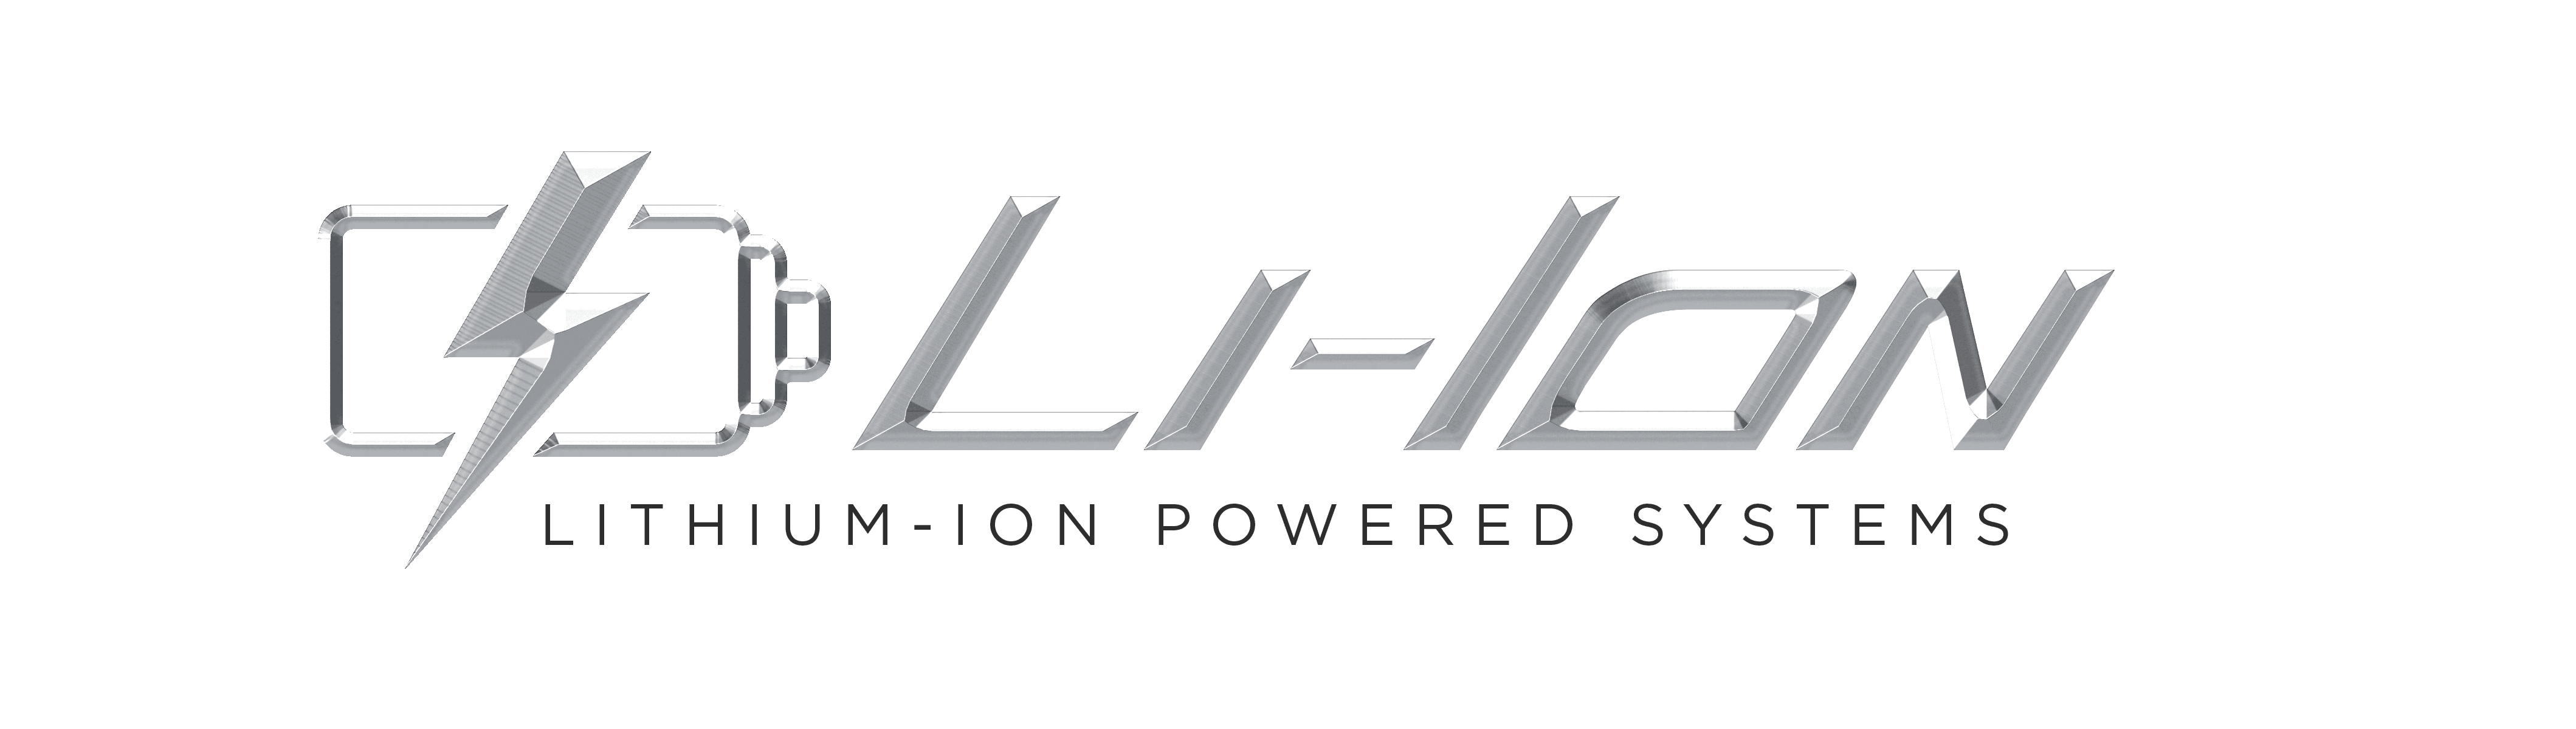 Li-Ion - Lithium-Ion Powered Systems